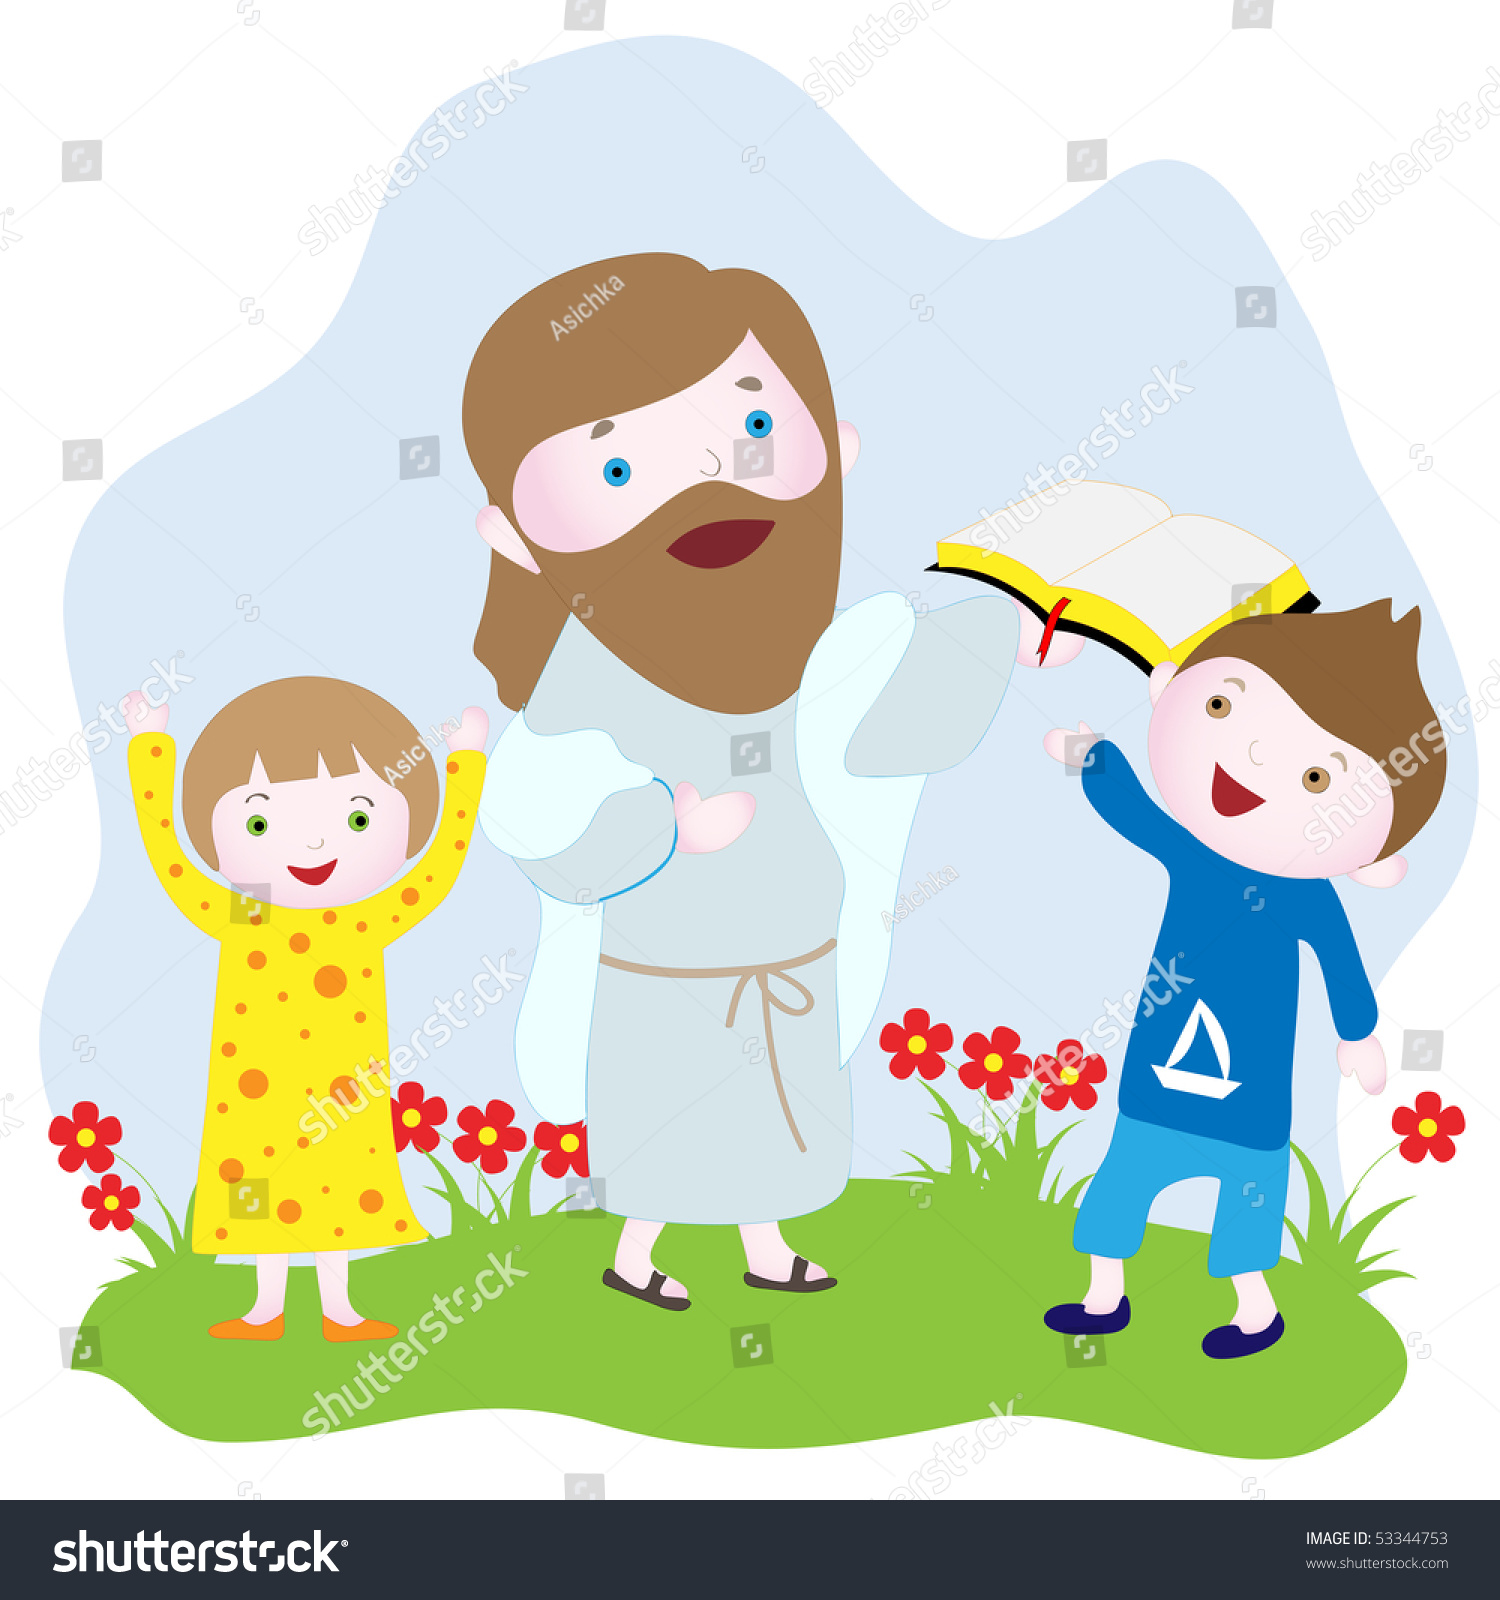 clipart jesus holding a man up - photo #13